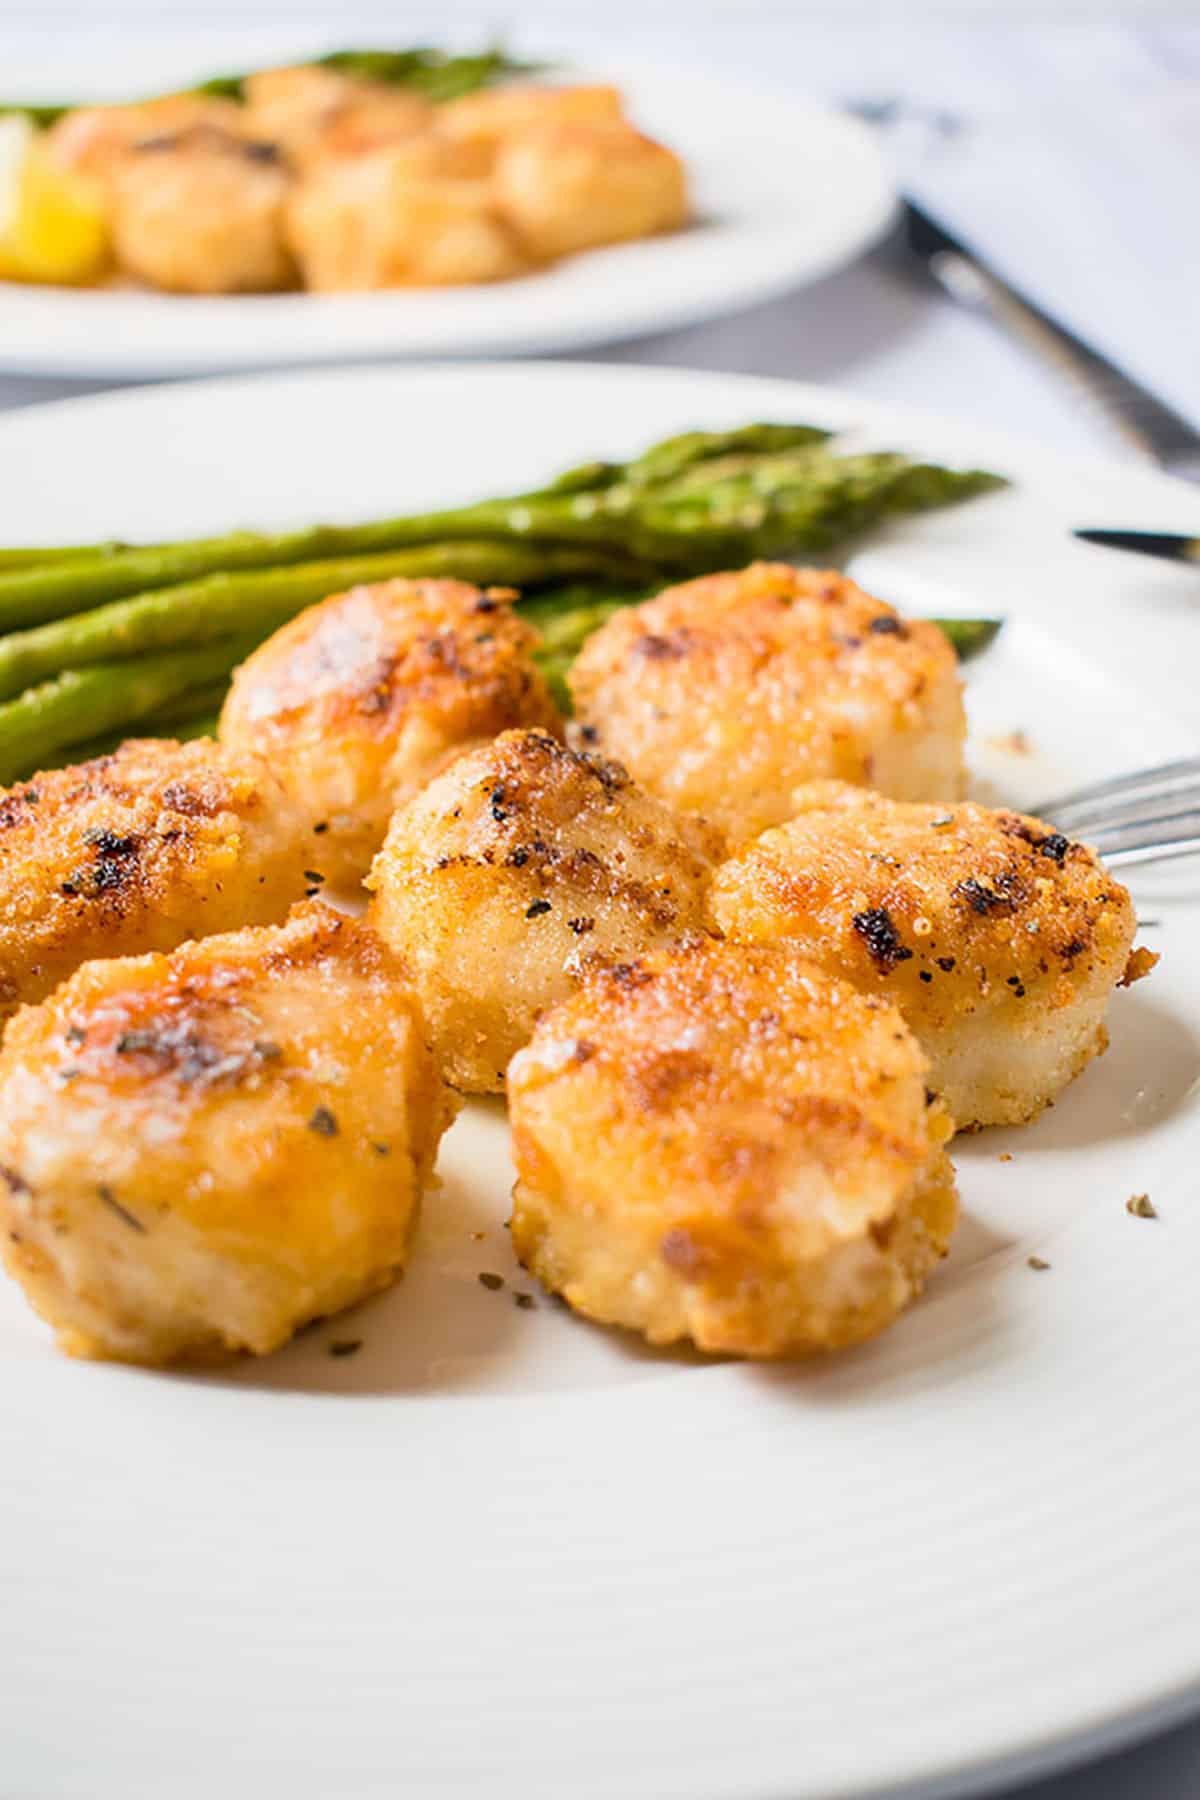 How to Meal Plan Photo - Broiled Scallops with Parmesan Bread Crumbs - Our favorite seafood dish! #scallops #seafood #broiledscallops #breadedscallops